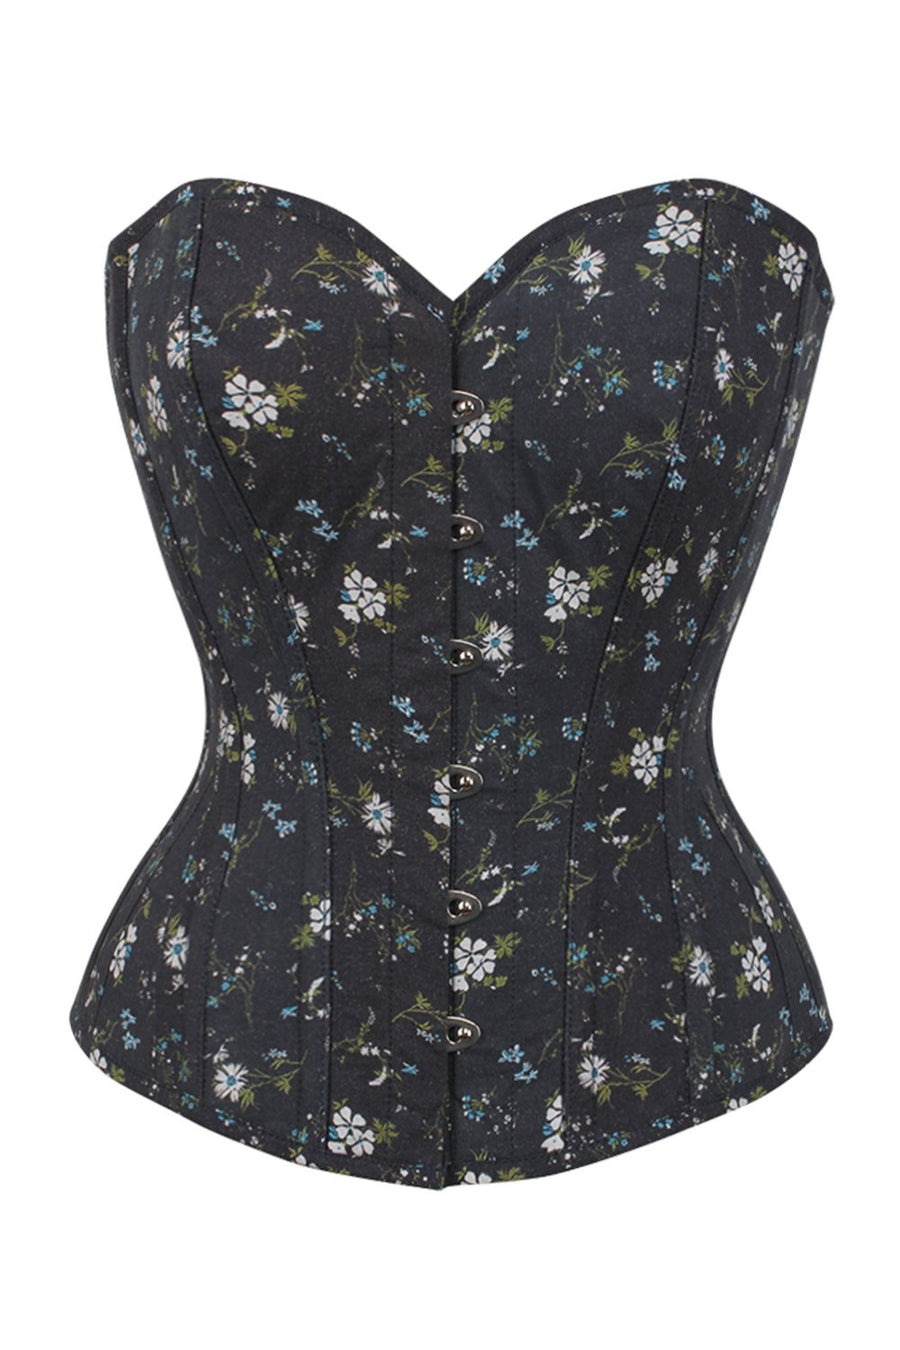 Dark Ditsy Floral Corset Top with Bow Detail